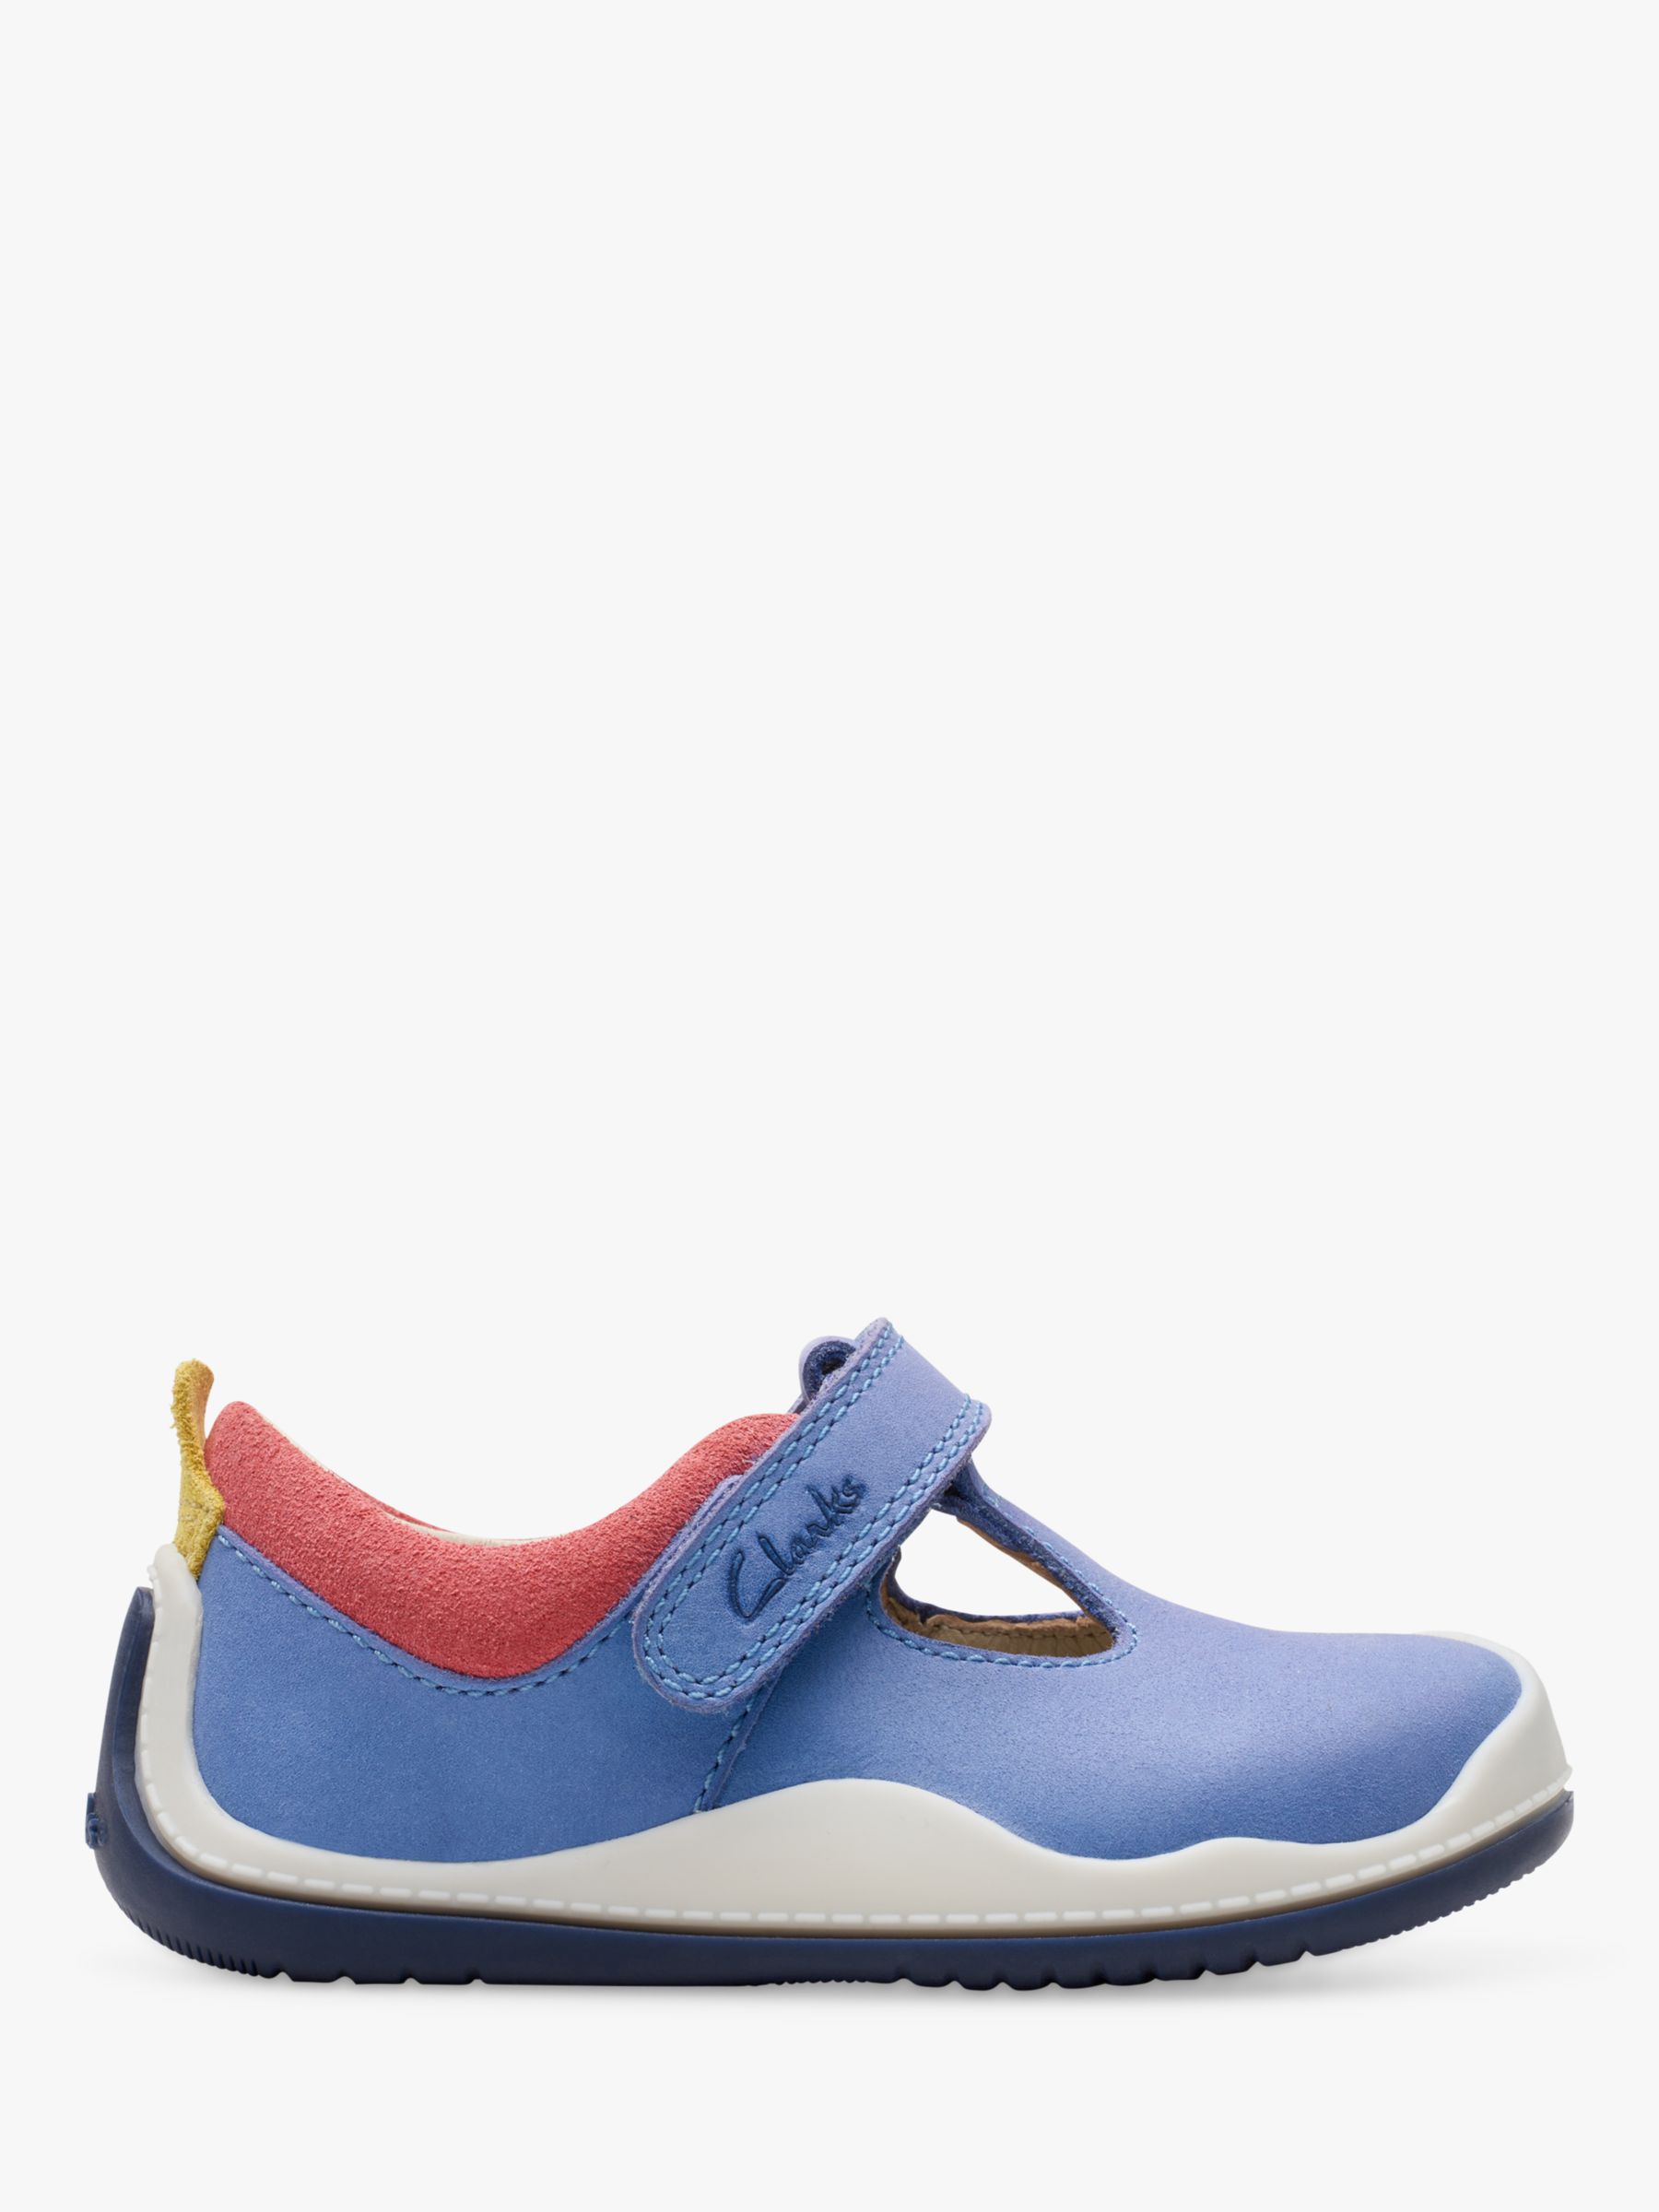 Clarks Baby Roller Bright T-Bar First Shoes, Blue, 3.5F Jnr